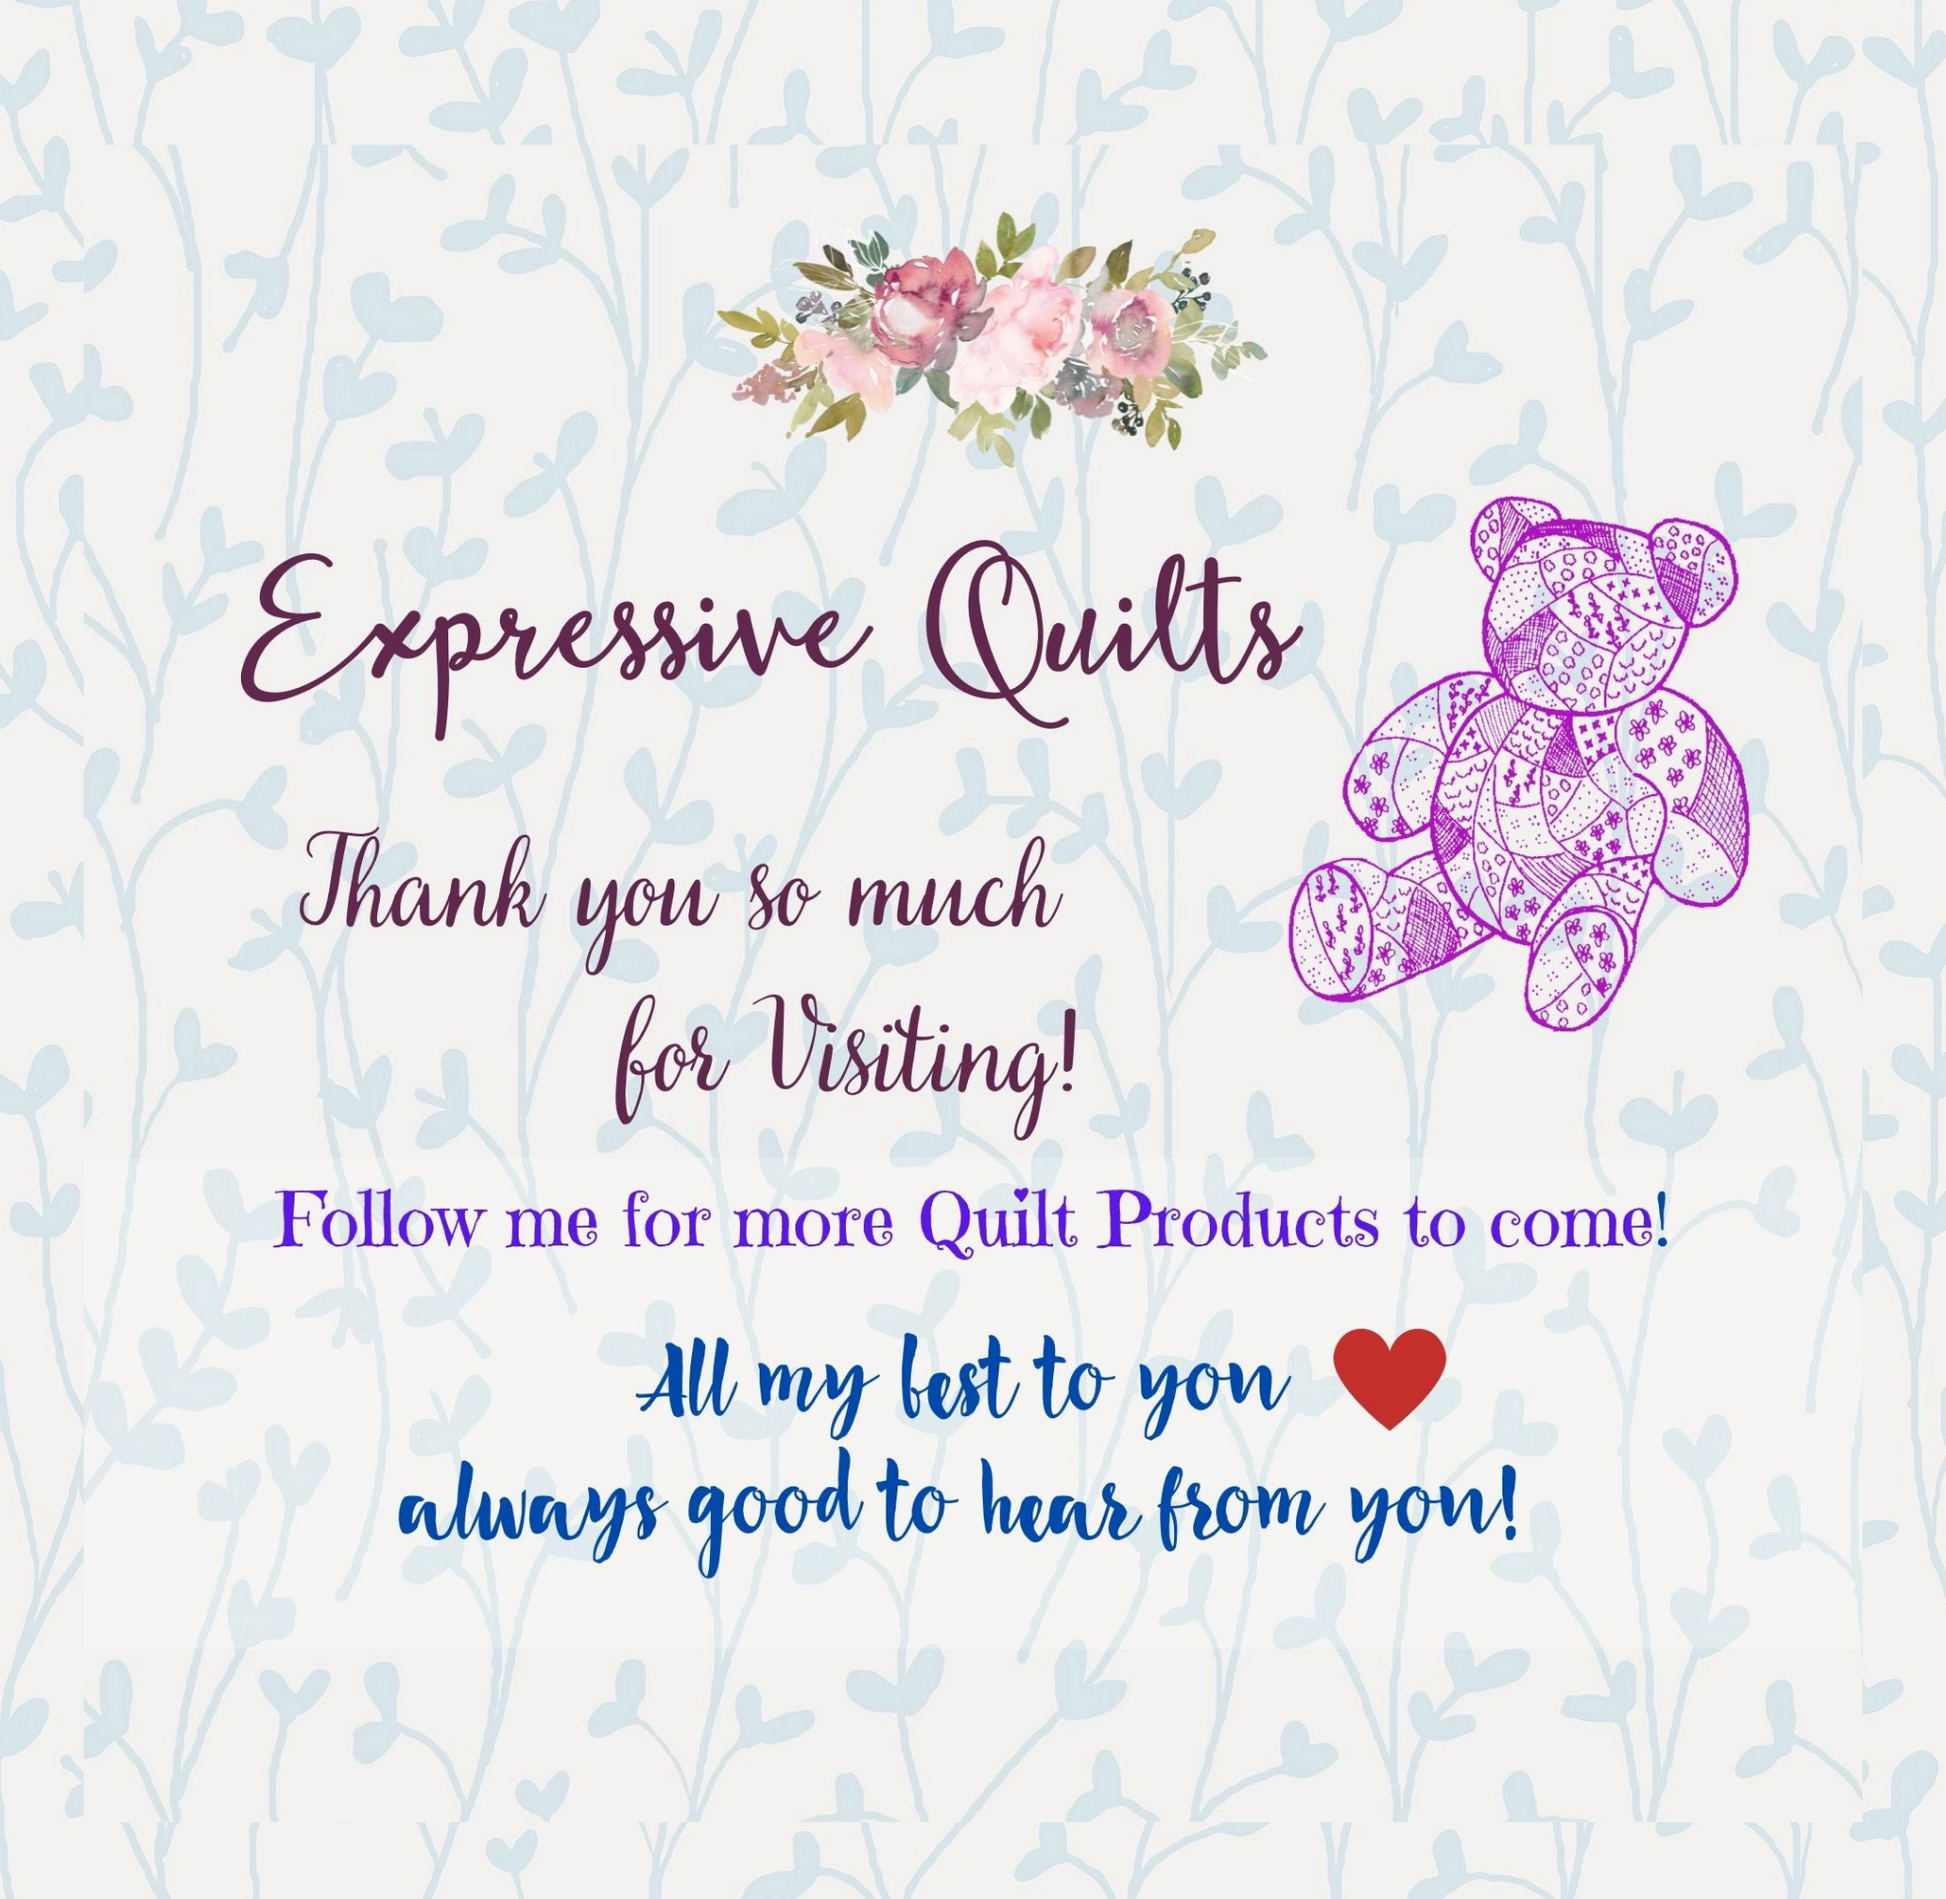 thank you from Expressive Quilts